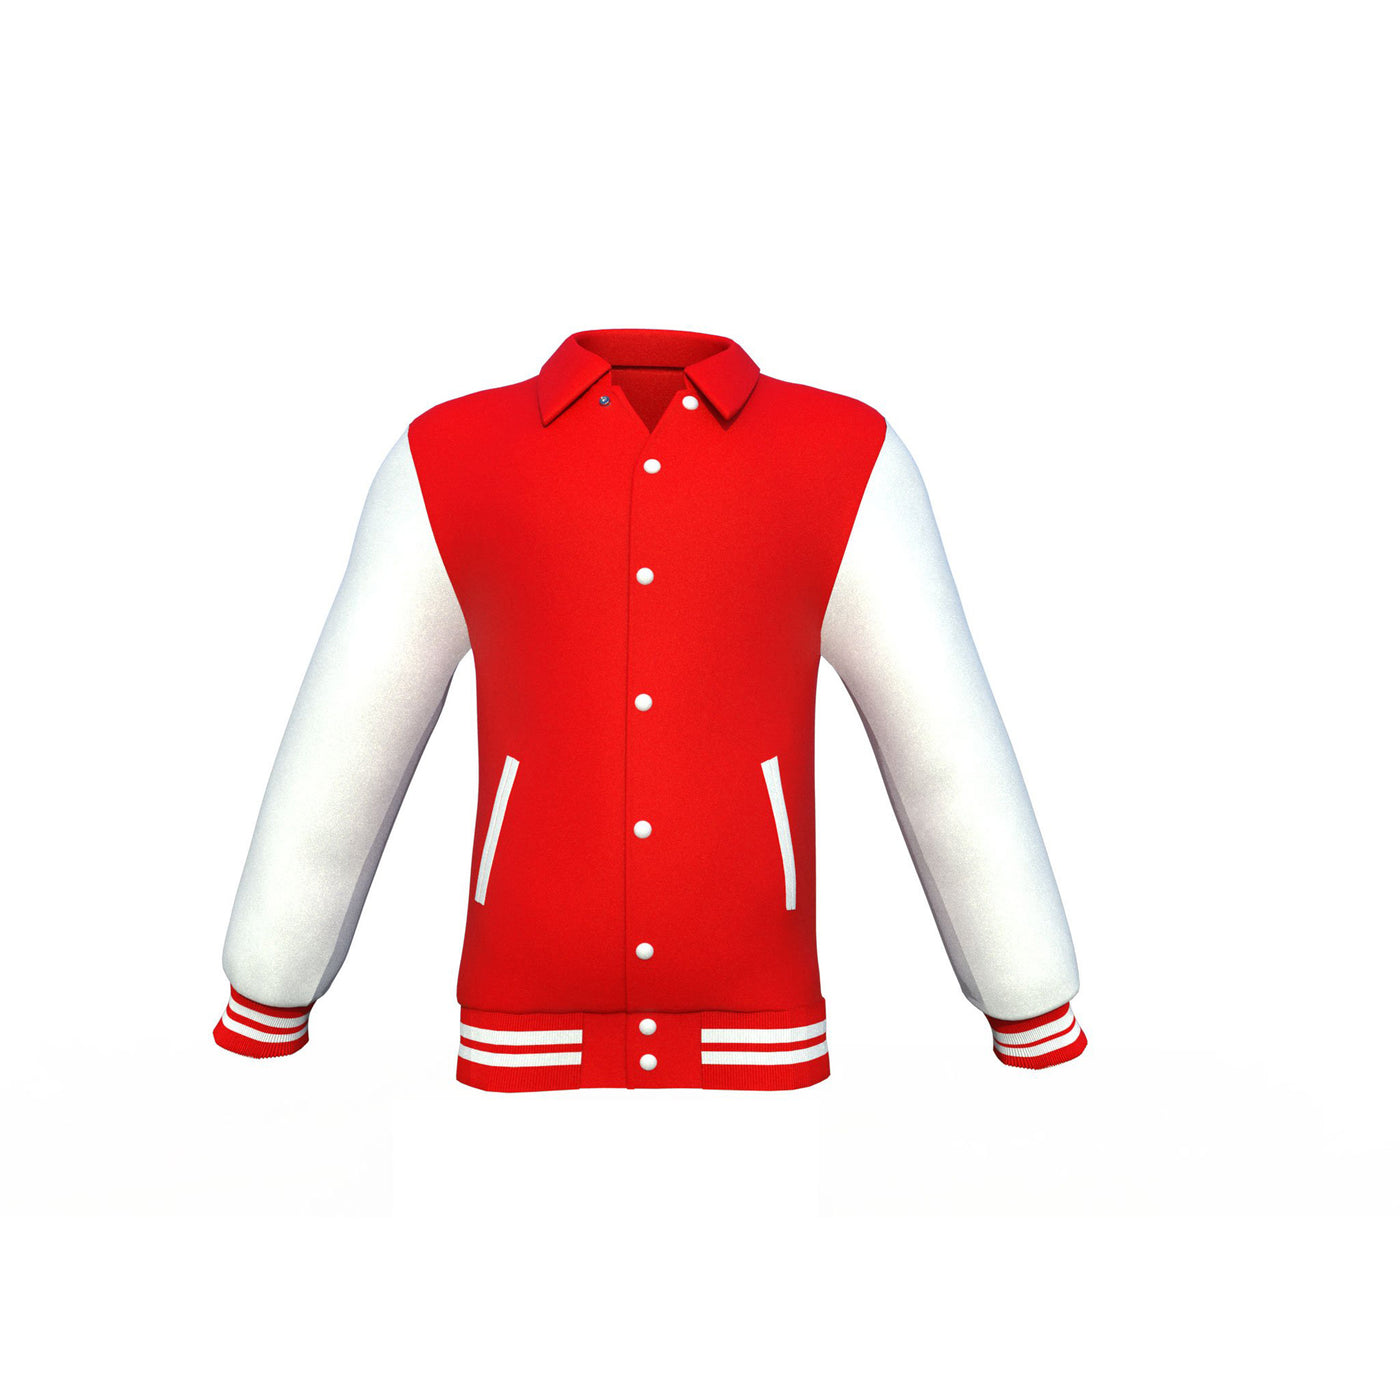 Soft and Cozy Jacket Red Varsity Letterman Jacket with White Sleeves